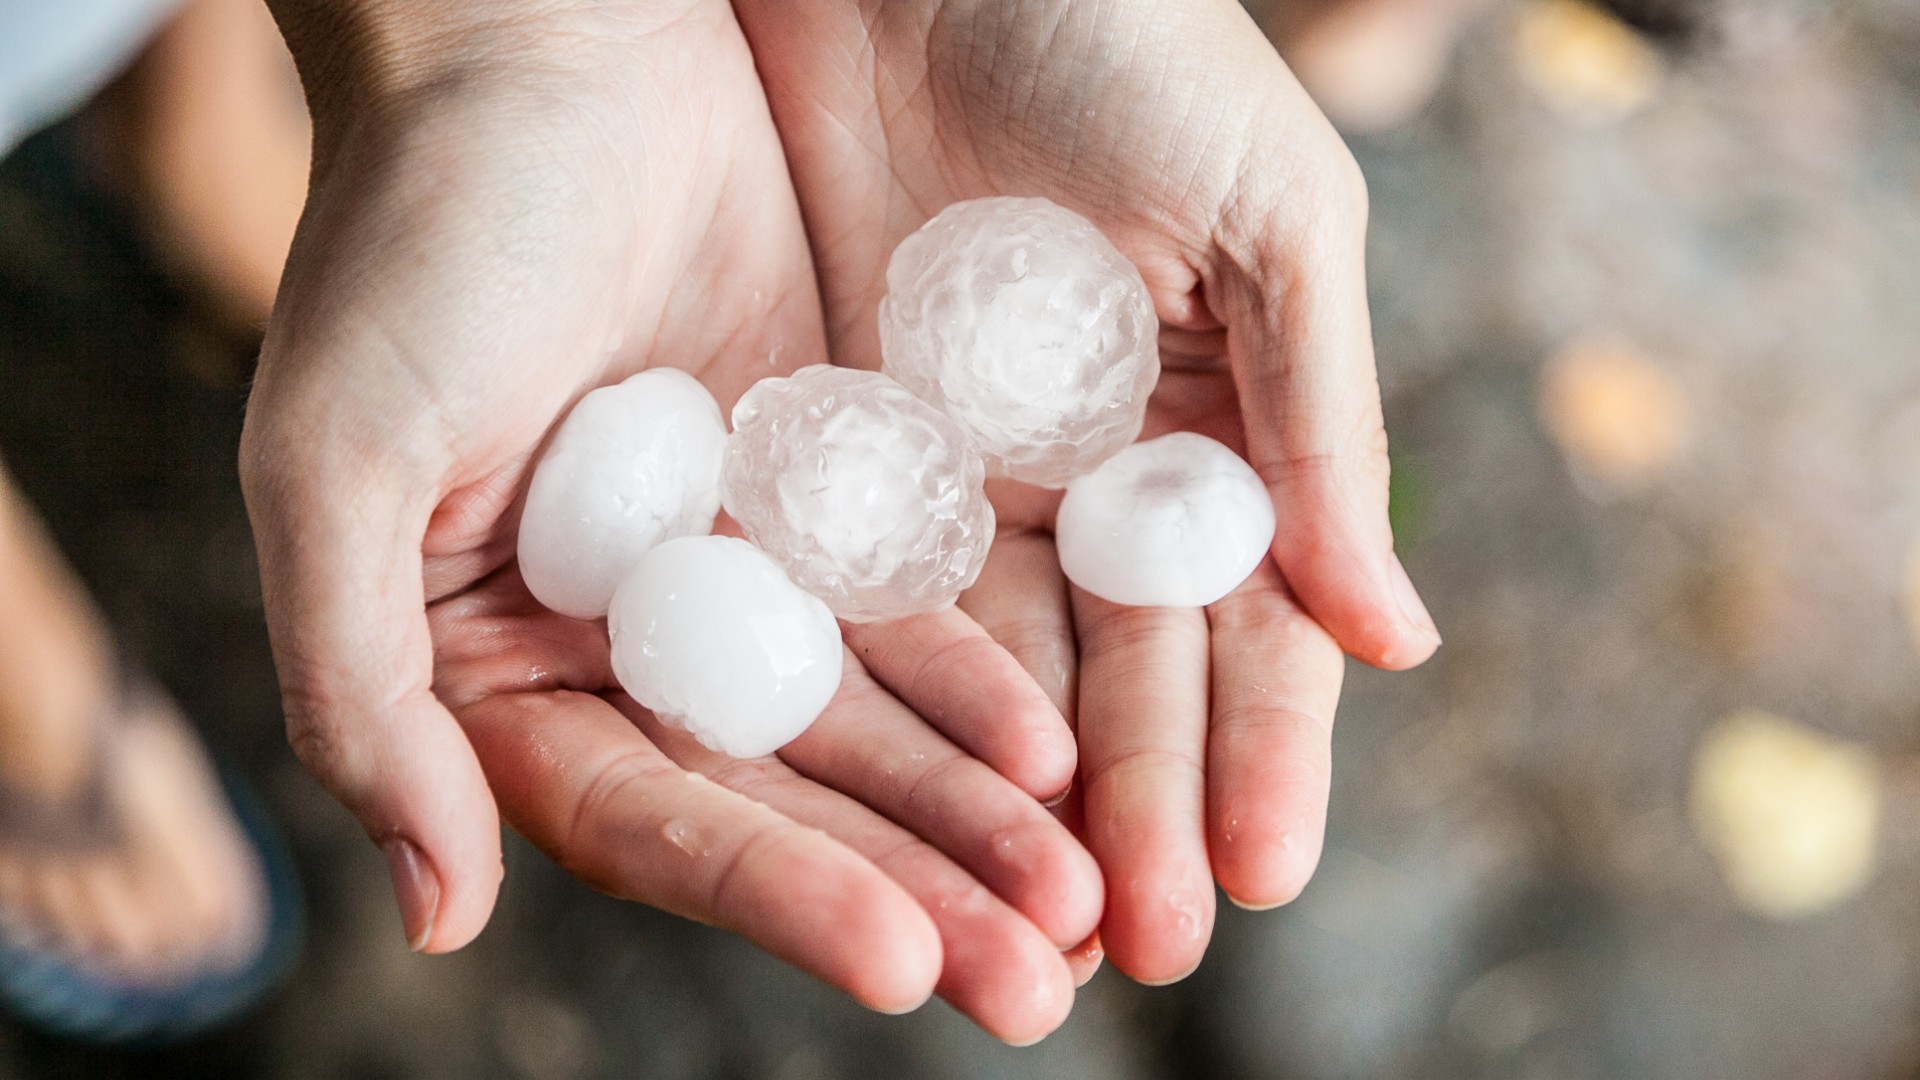 What to Do if Your Car or Home has Hail Damage